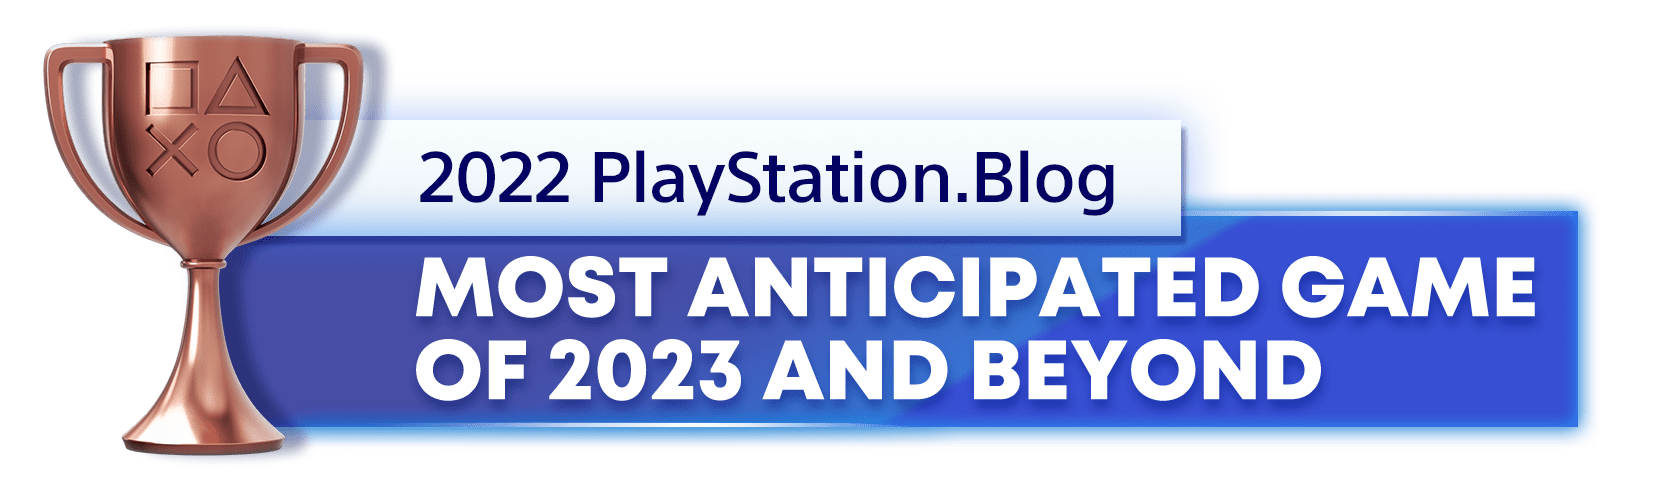 PlayStation Blog's 2022 Bronze trophy for most anticipated game of 2023 and beyond